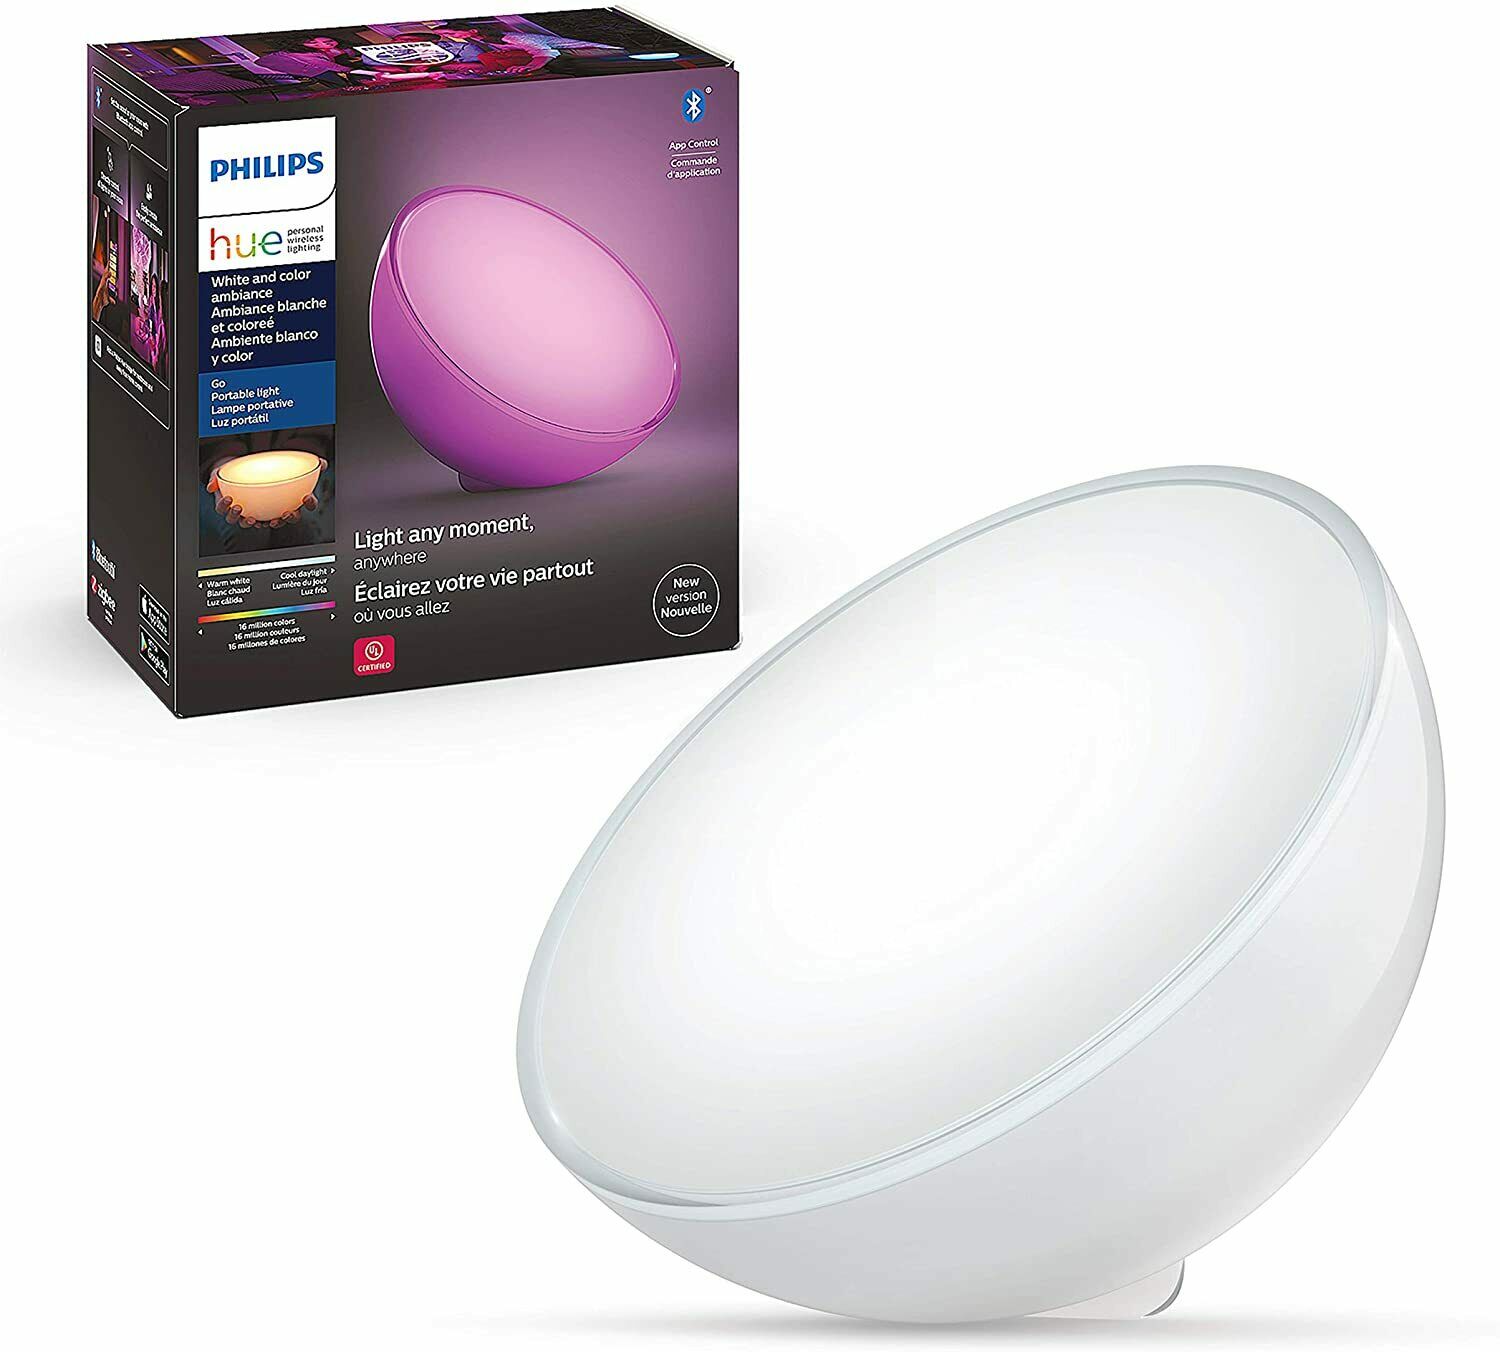 Philips Hue Go White & Color Ambiance Portable Smart Table Light